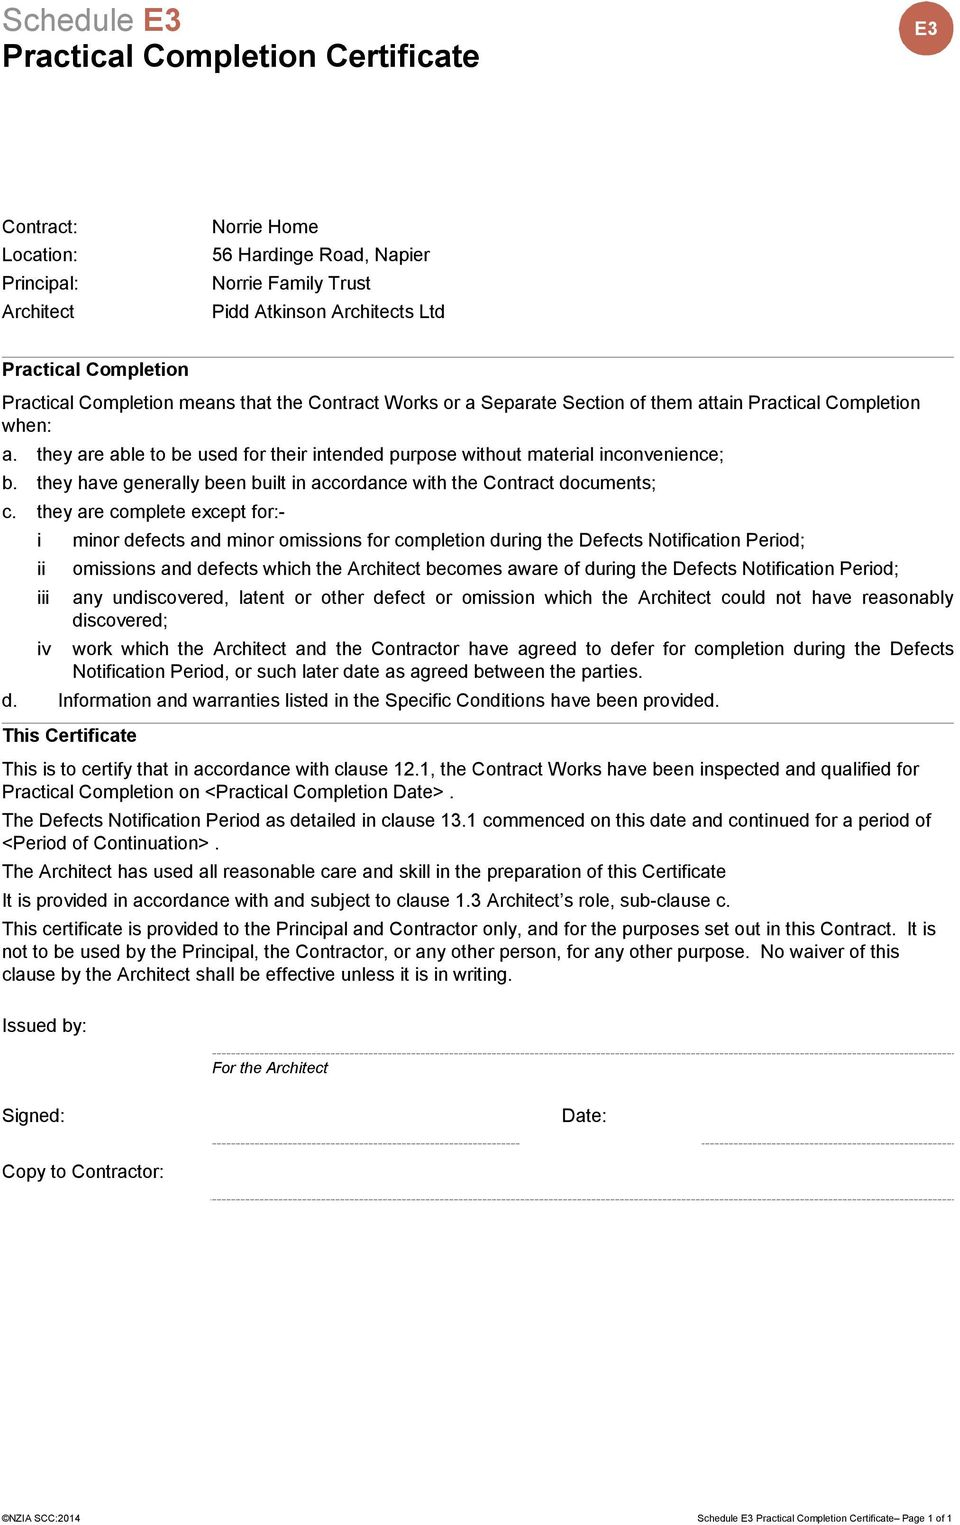 NZIA Standard Construction Contract - PDF Free Download Regarding Practical Completion Certificate Template Jct